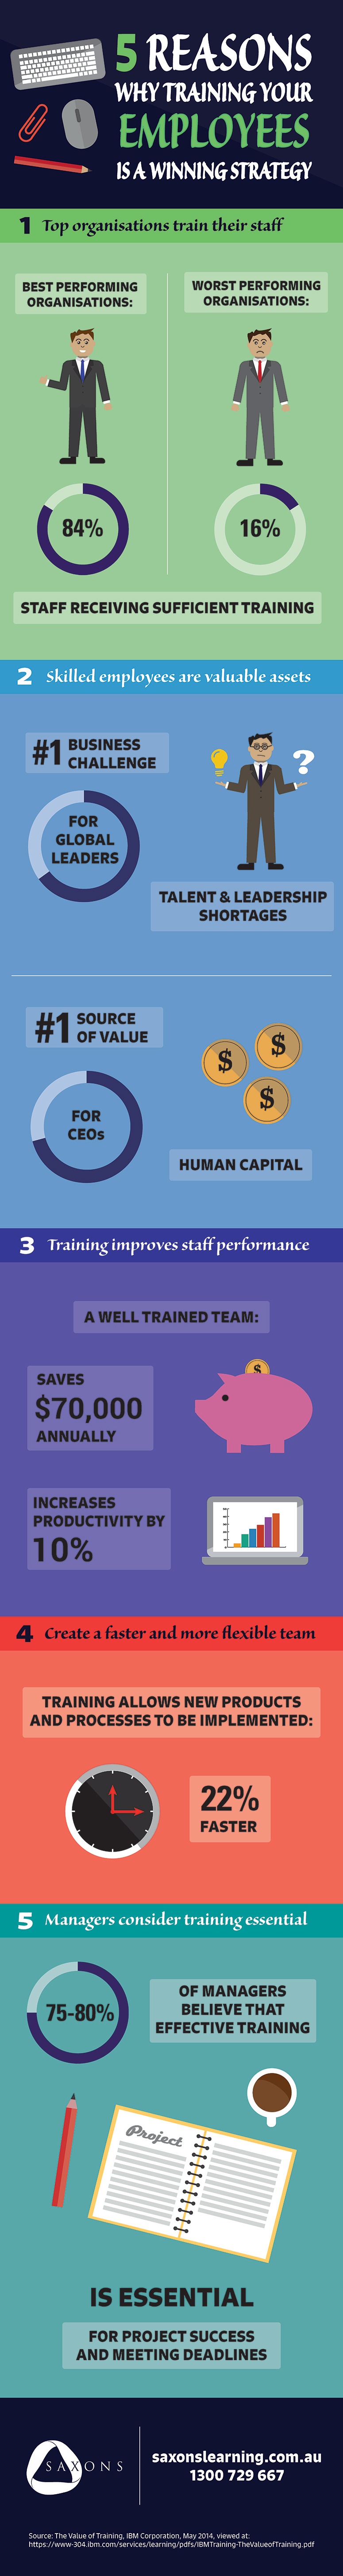 5 Reasons Why Staff Training is a Winning Strategy Infographic